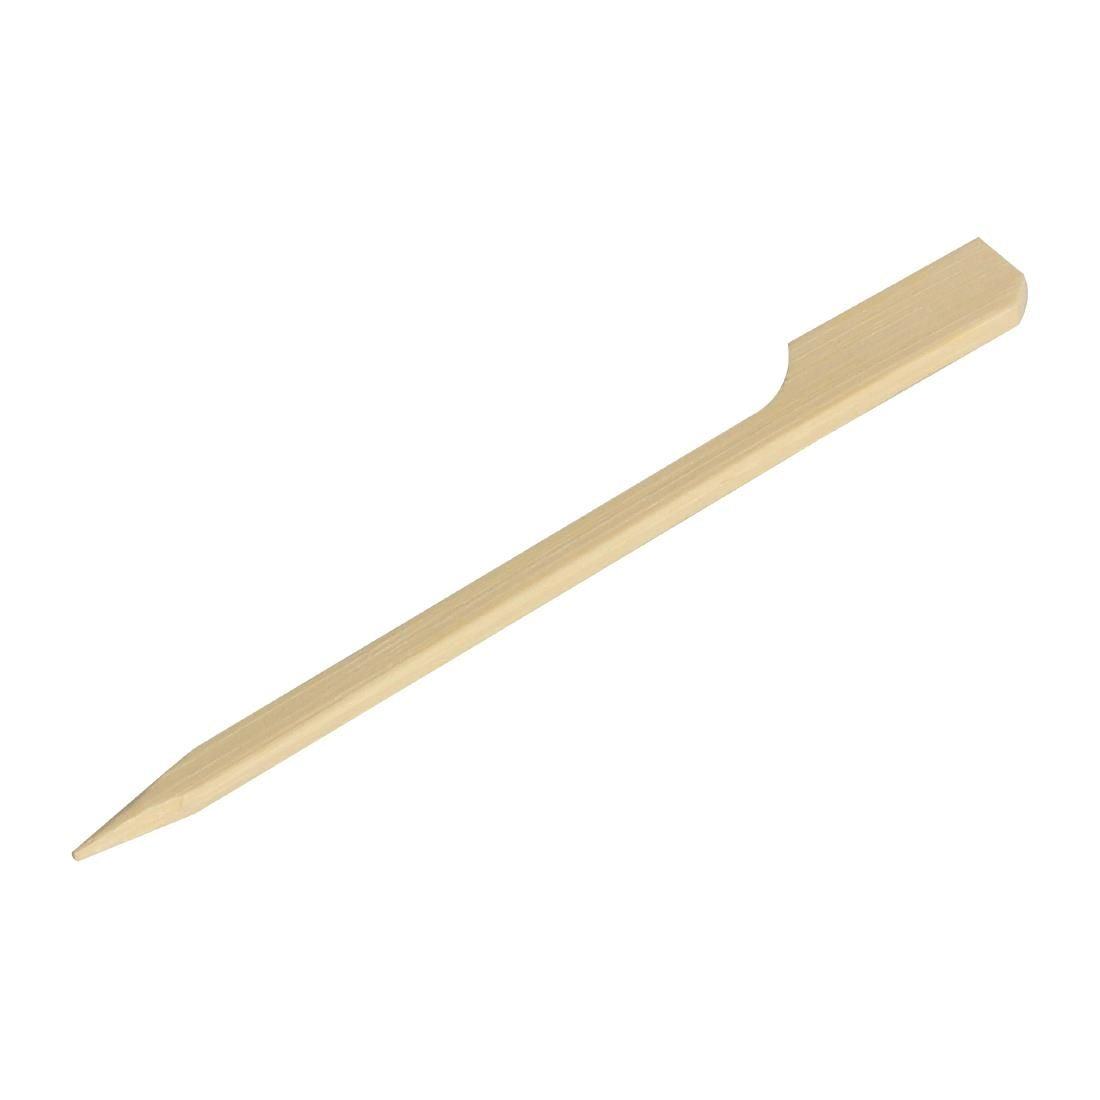 DK397 Fiesta Green Biodegradable Bamboo Paddle Skewers 90mm (Pack of 100) JD Catering Equipment Solutions Ltd